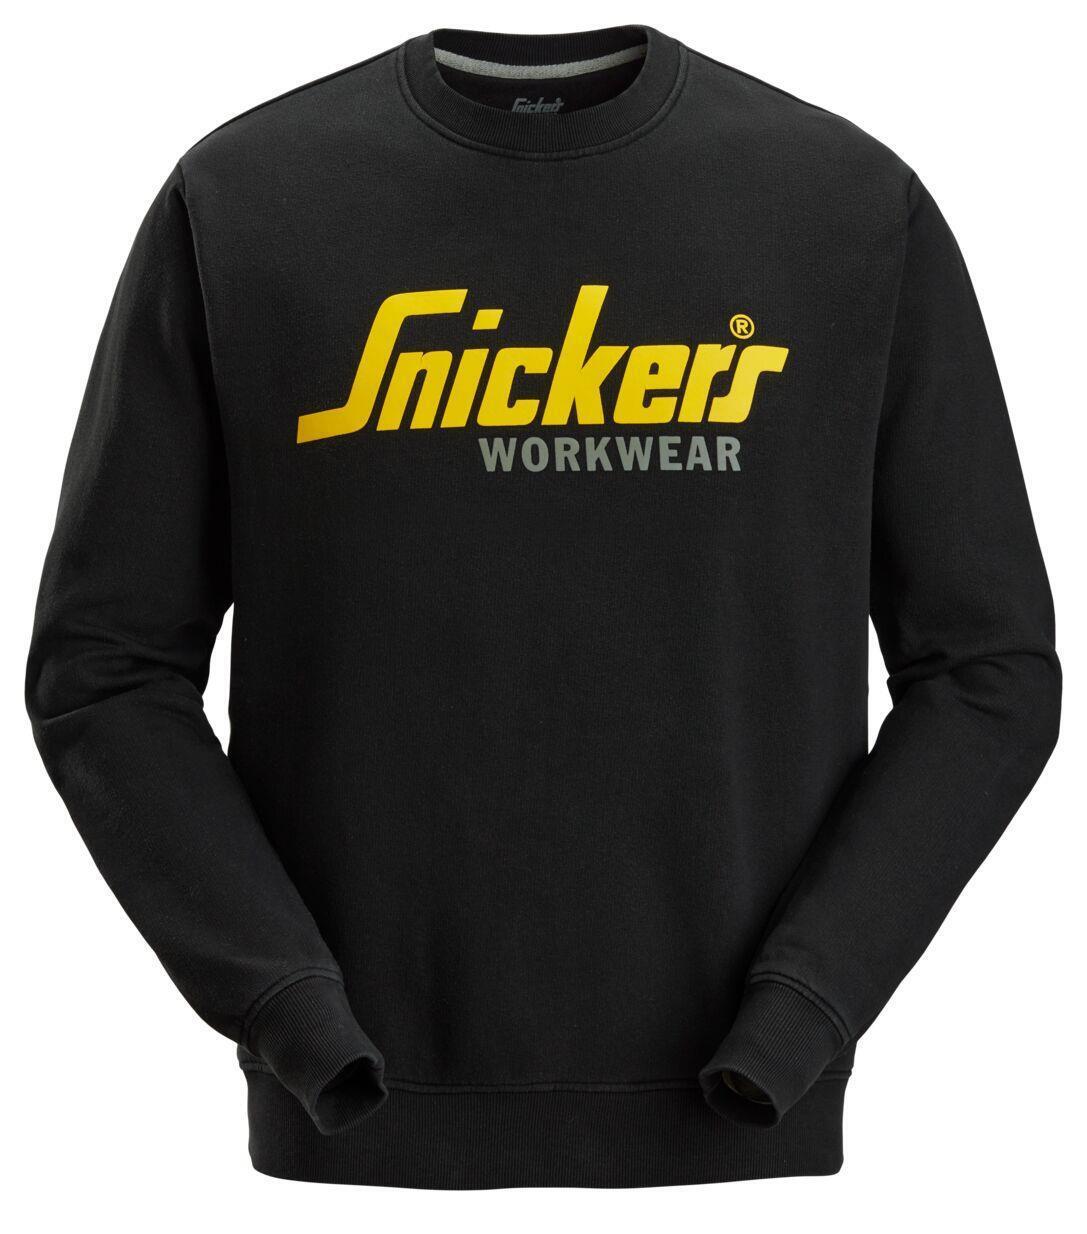 Snickers Limited Addition Sweatshirt